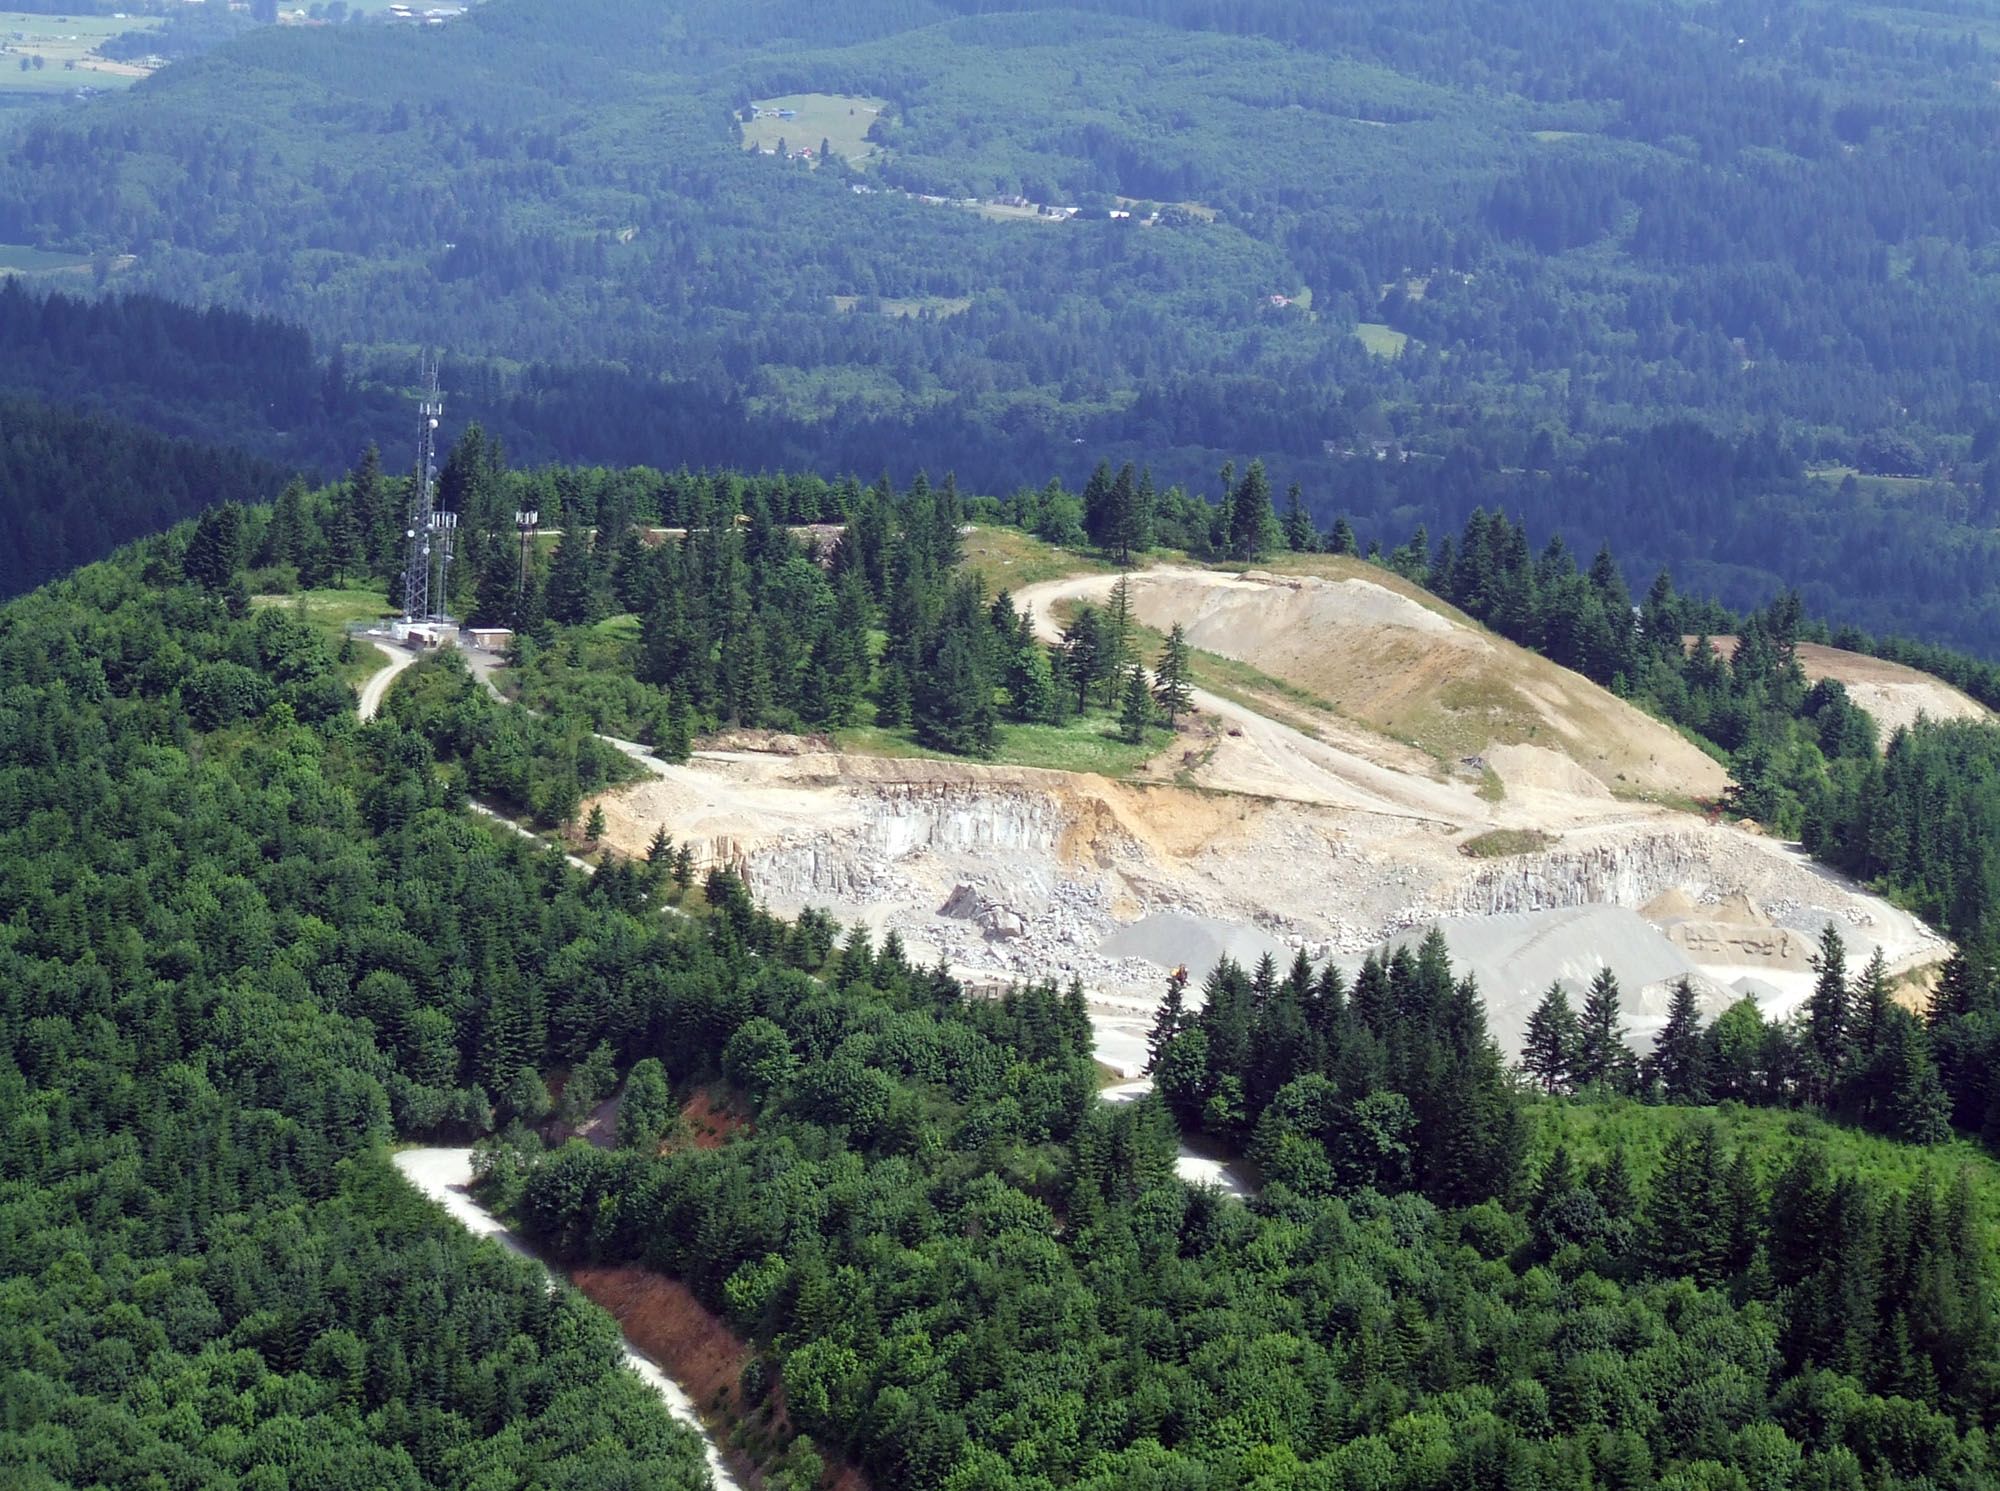 The Yacolt Mountain Quarry as seen from above in 2008. (Handout)